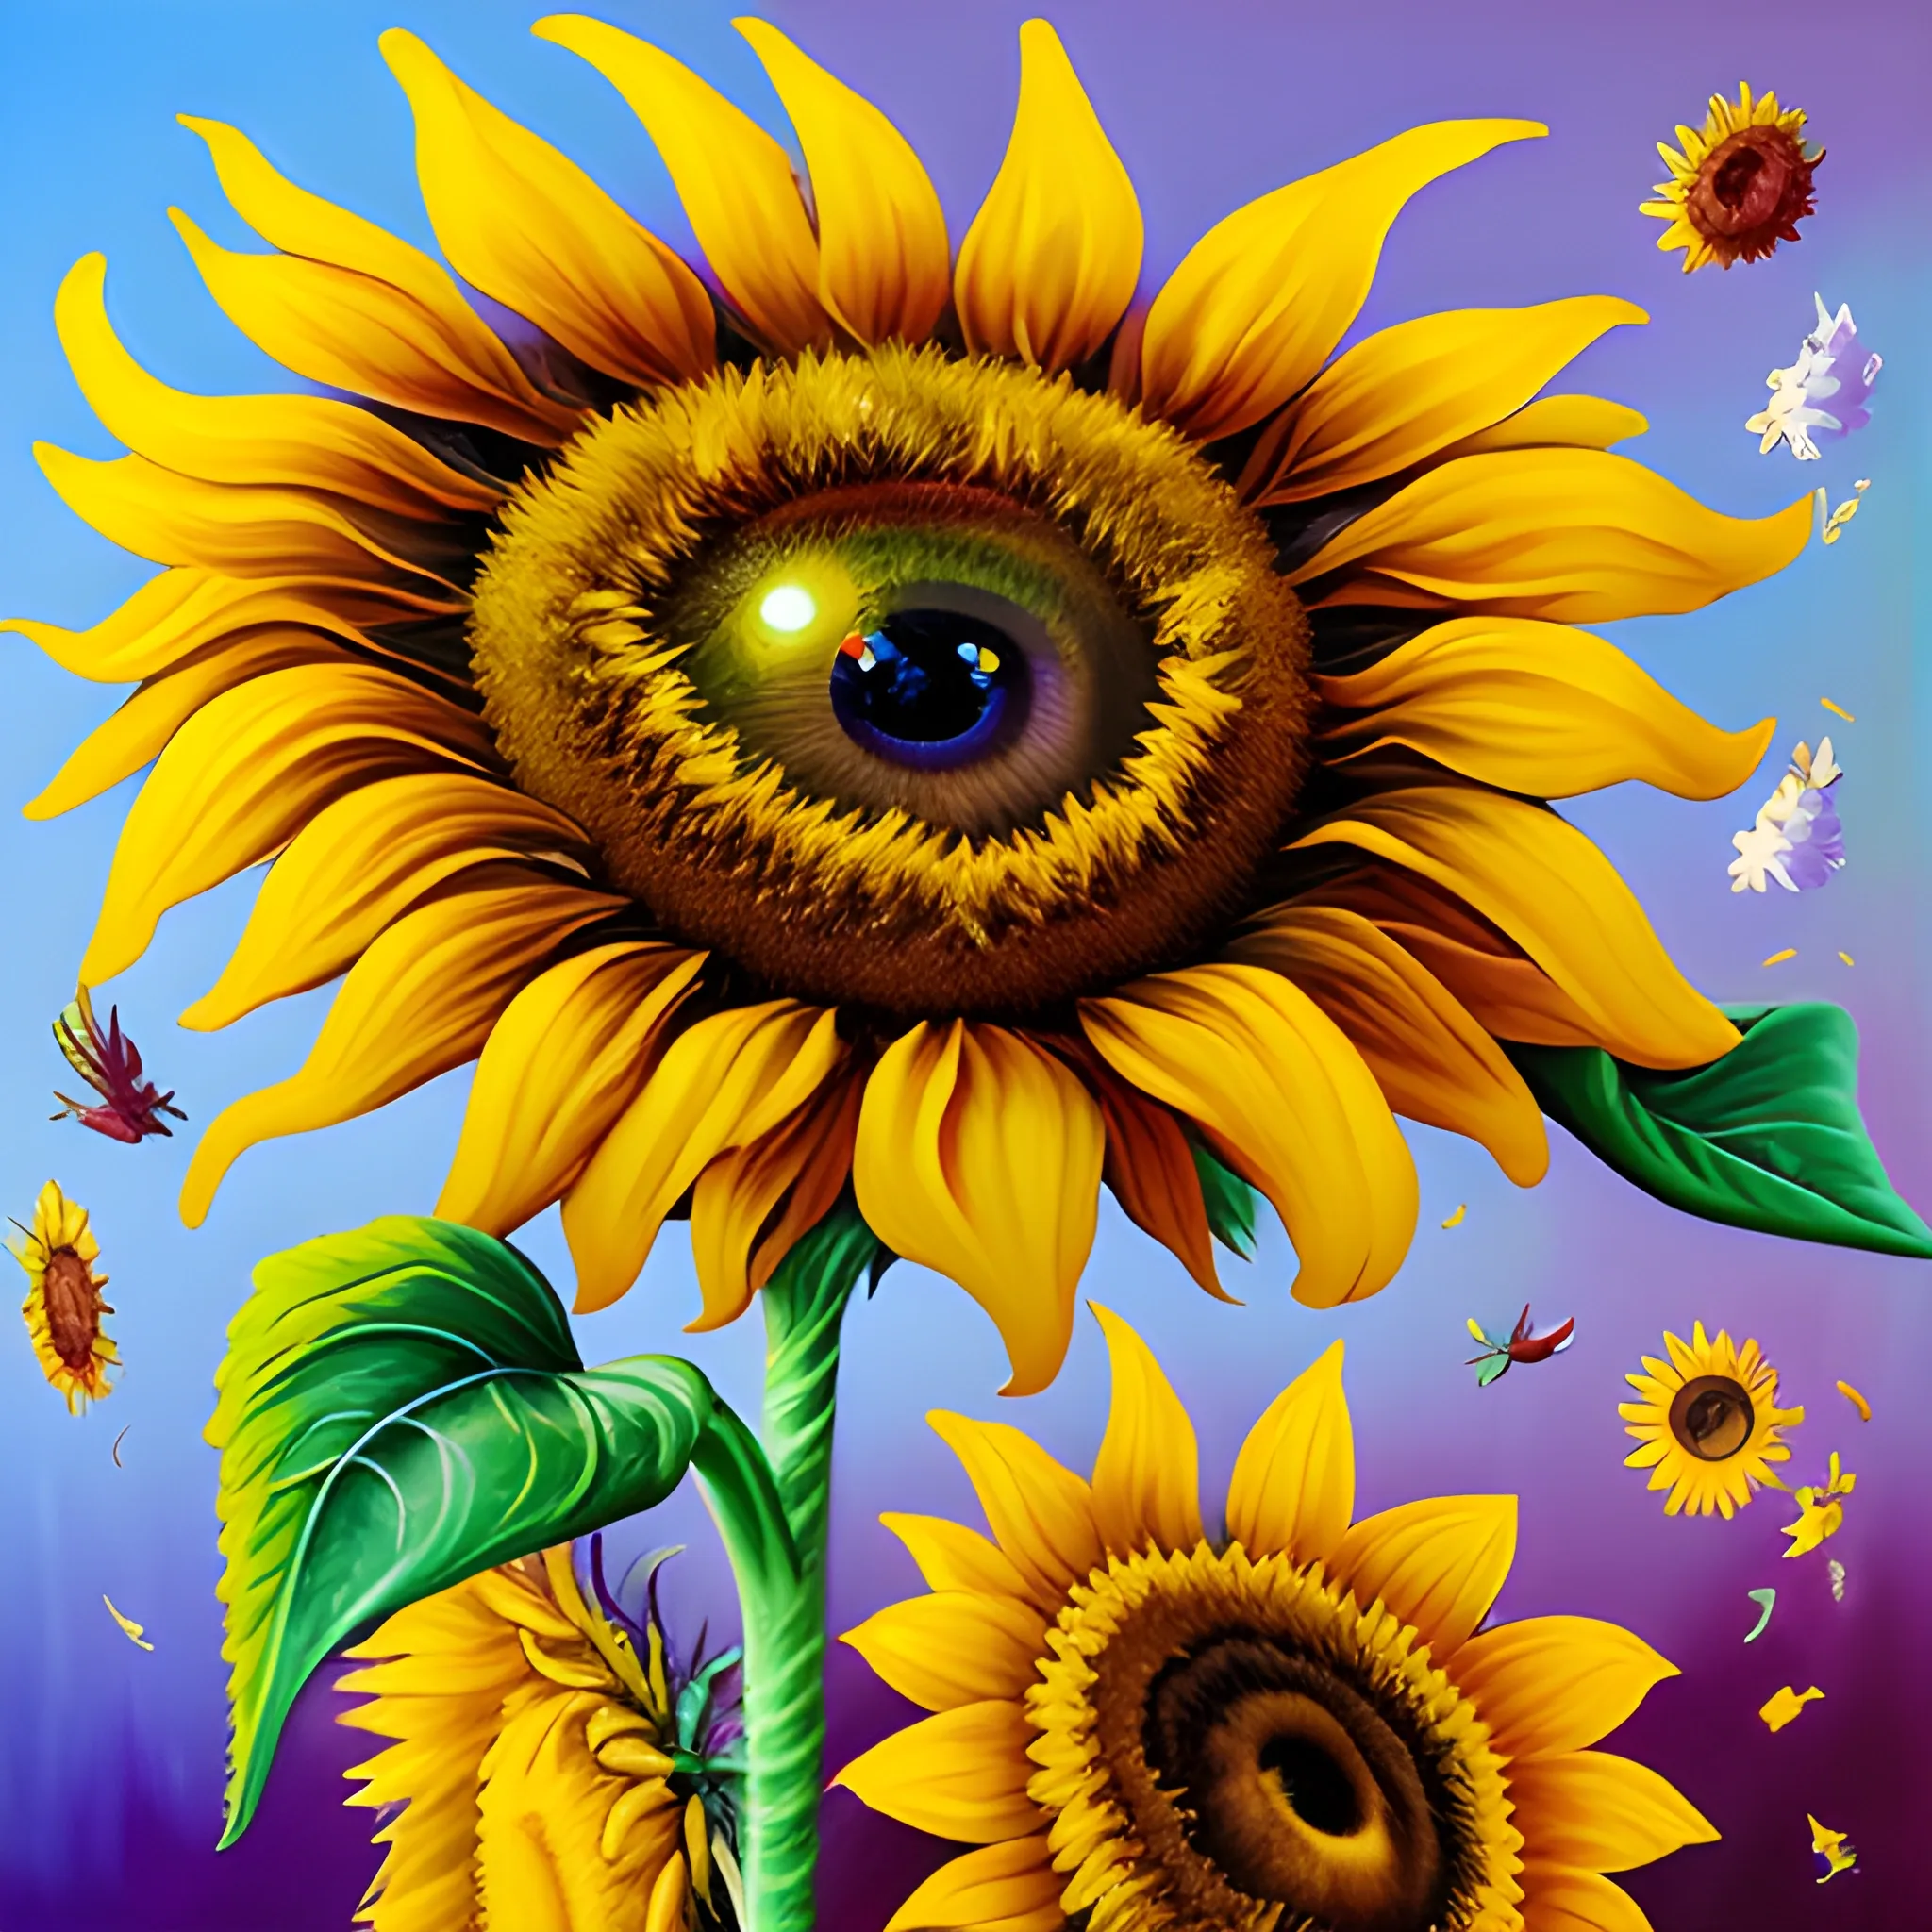 Oil painting style, rich and gorgeous colors, clear layers, yellow, purple, red sunflowers, some are blooming, some are drooping, there is an eye in the center of the sunflower, ultra-high-definition picture quality, Oil Painting, 3D